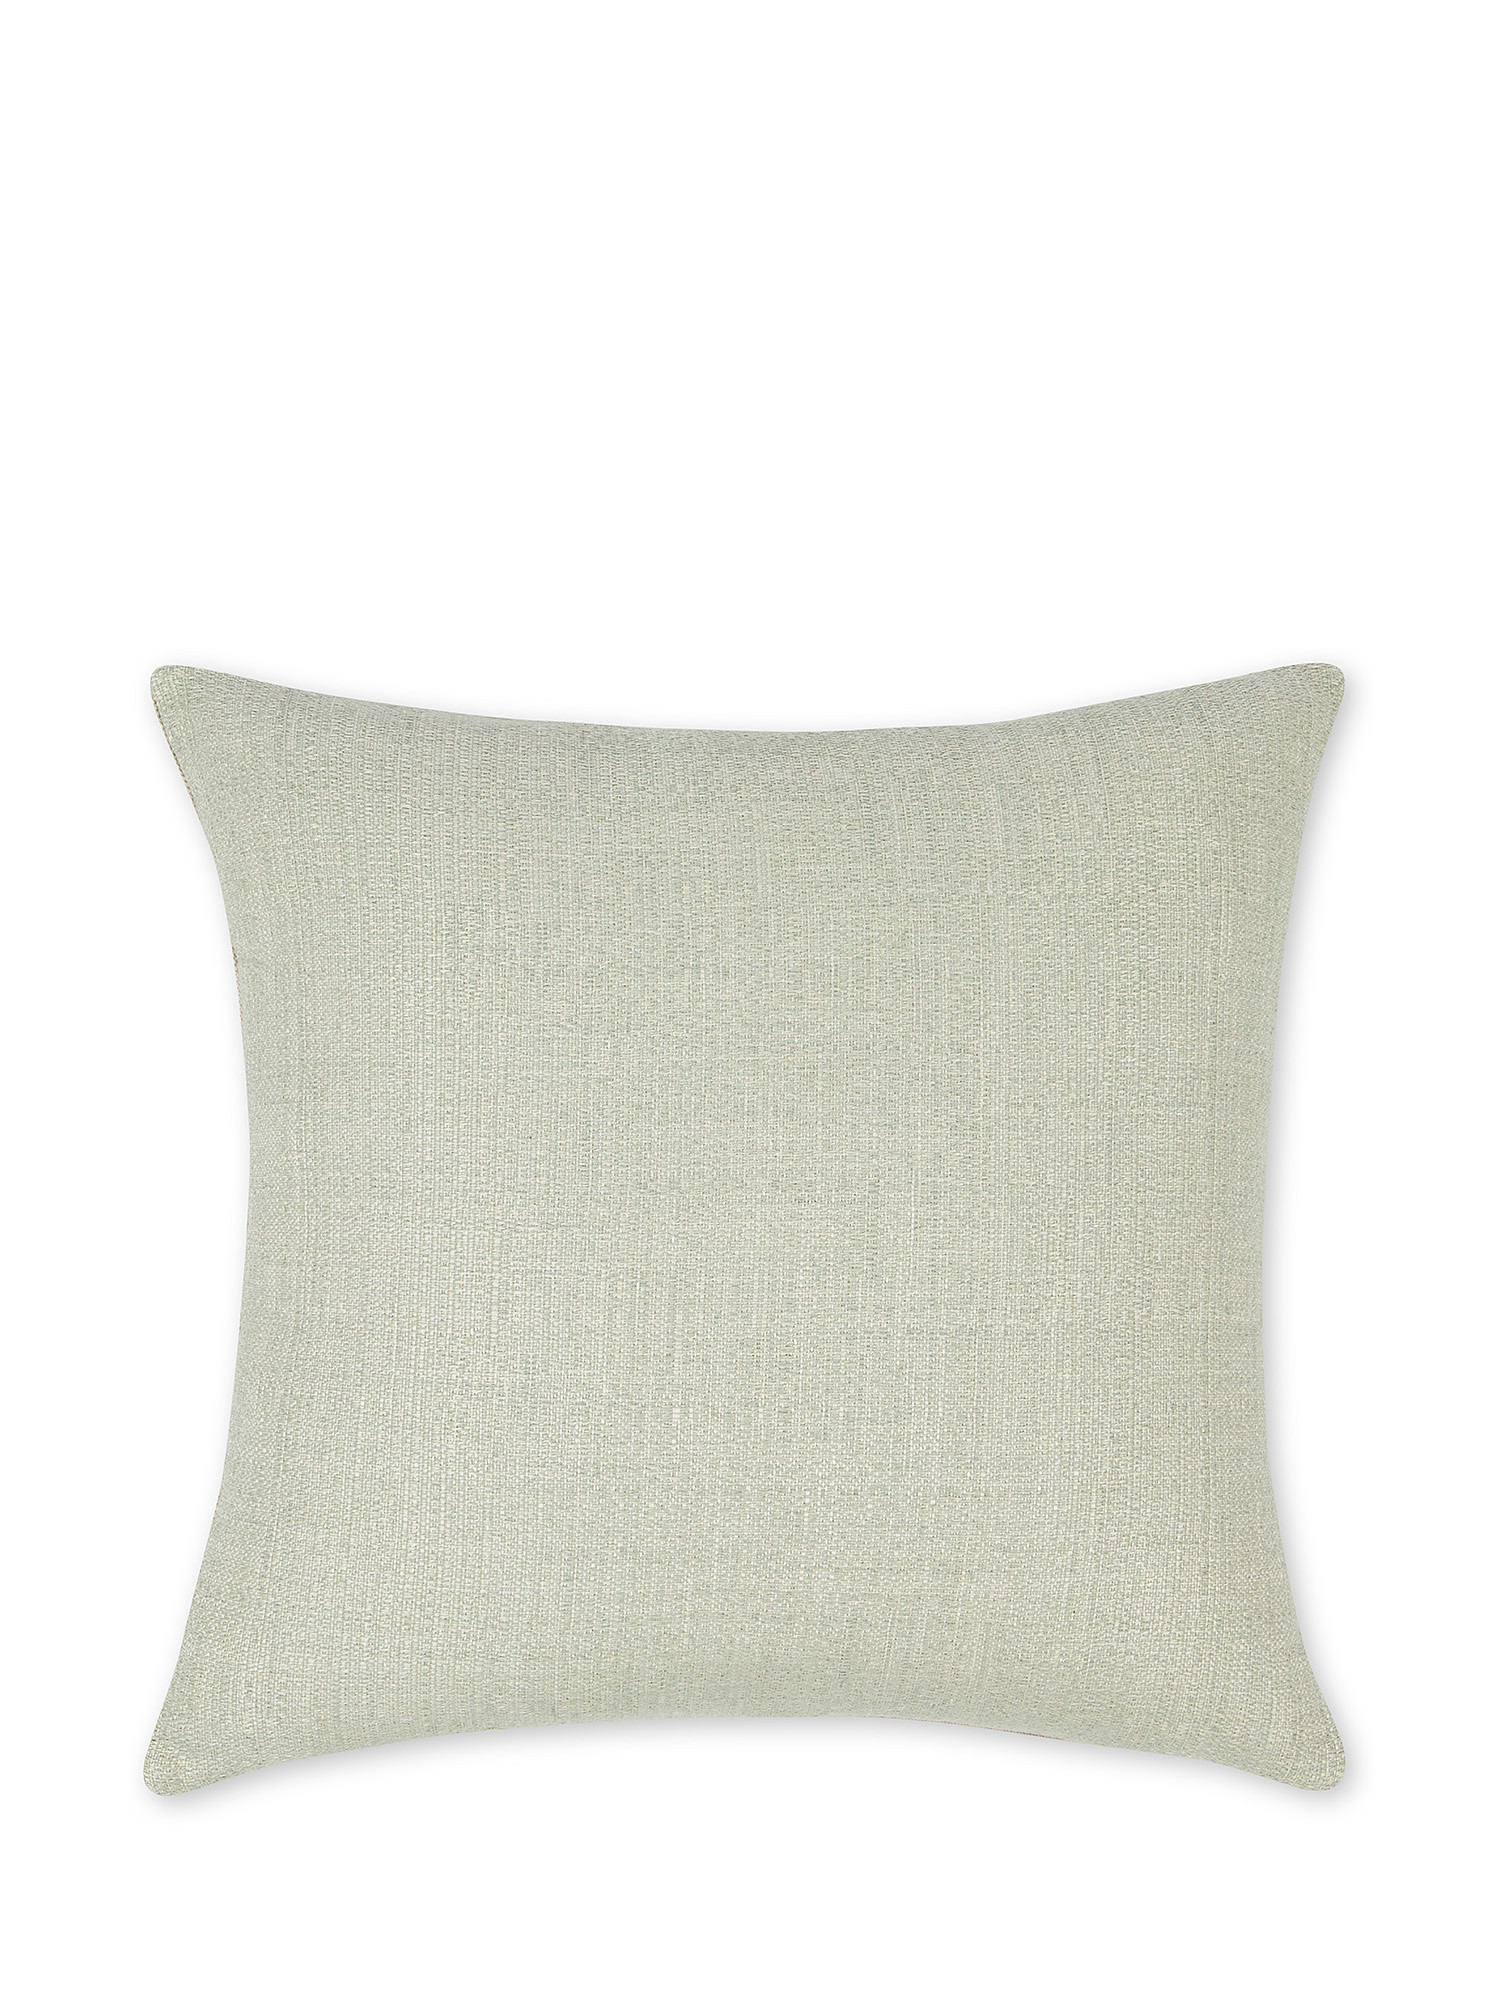 45x45 cm cushion in cotton and linen, Beige, large image number 0